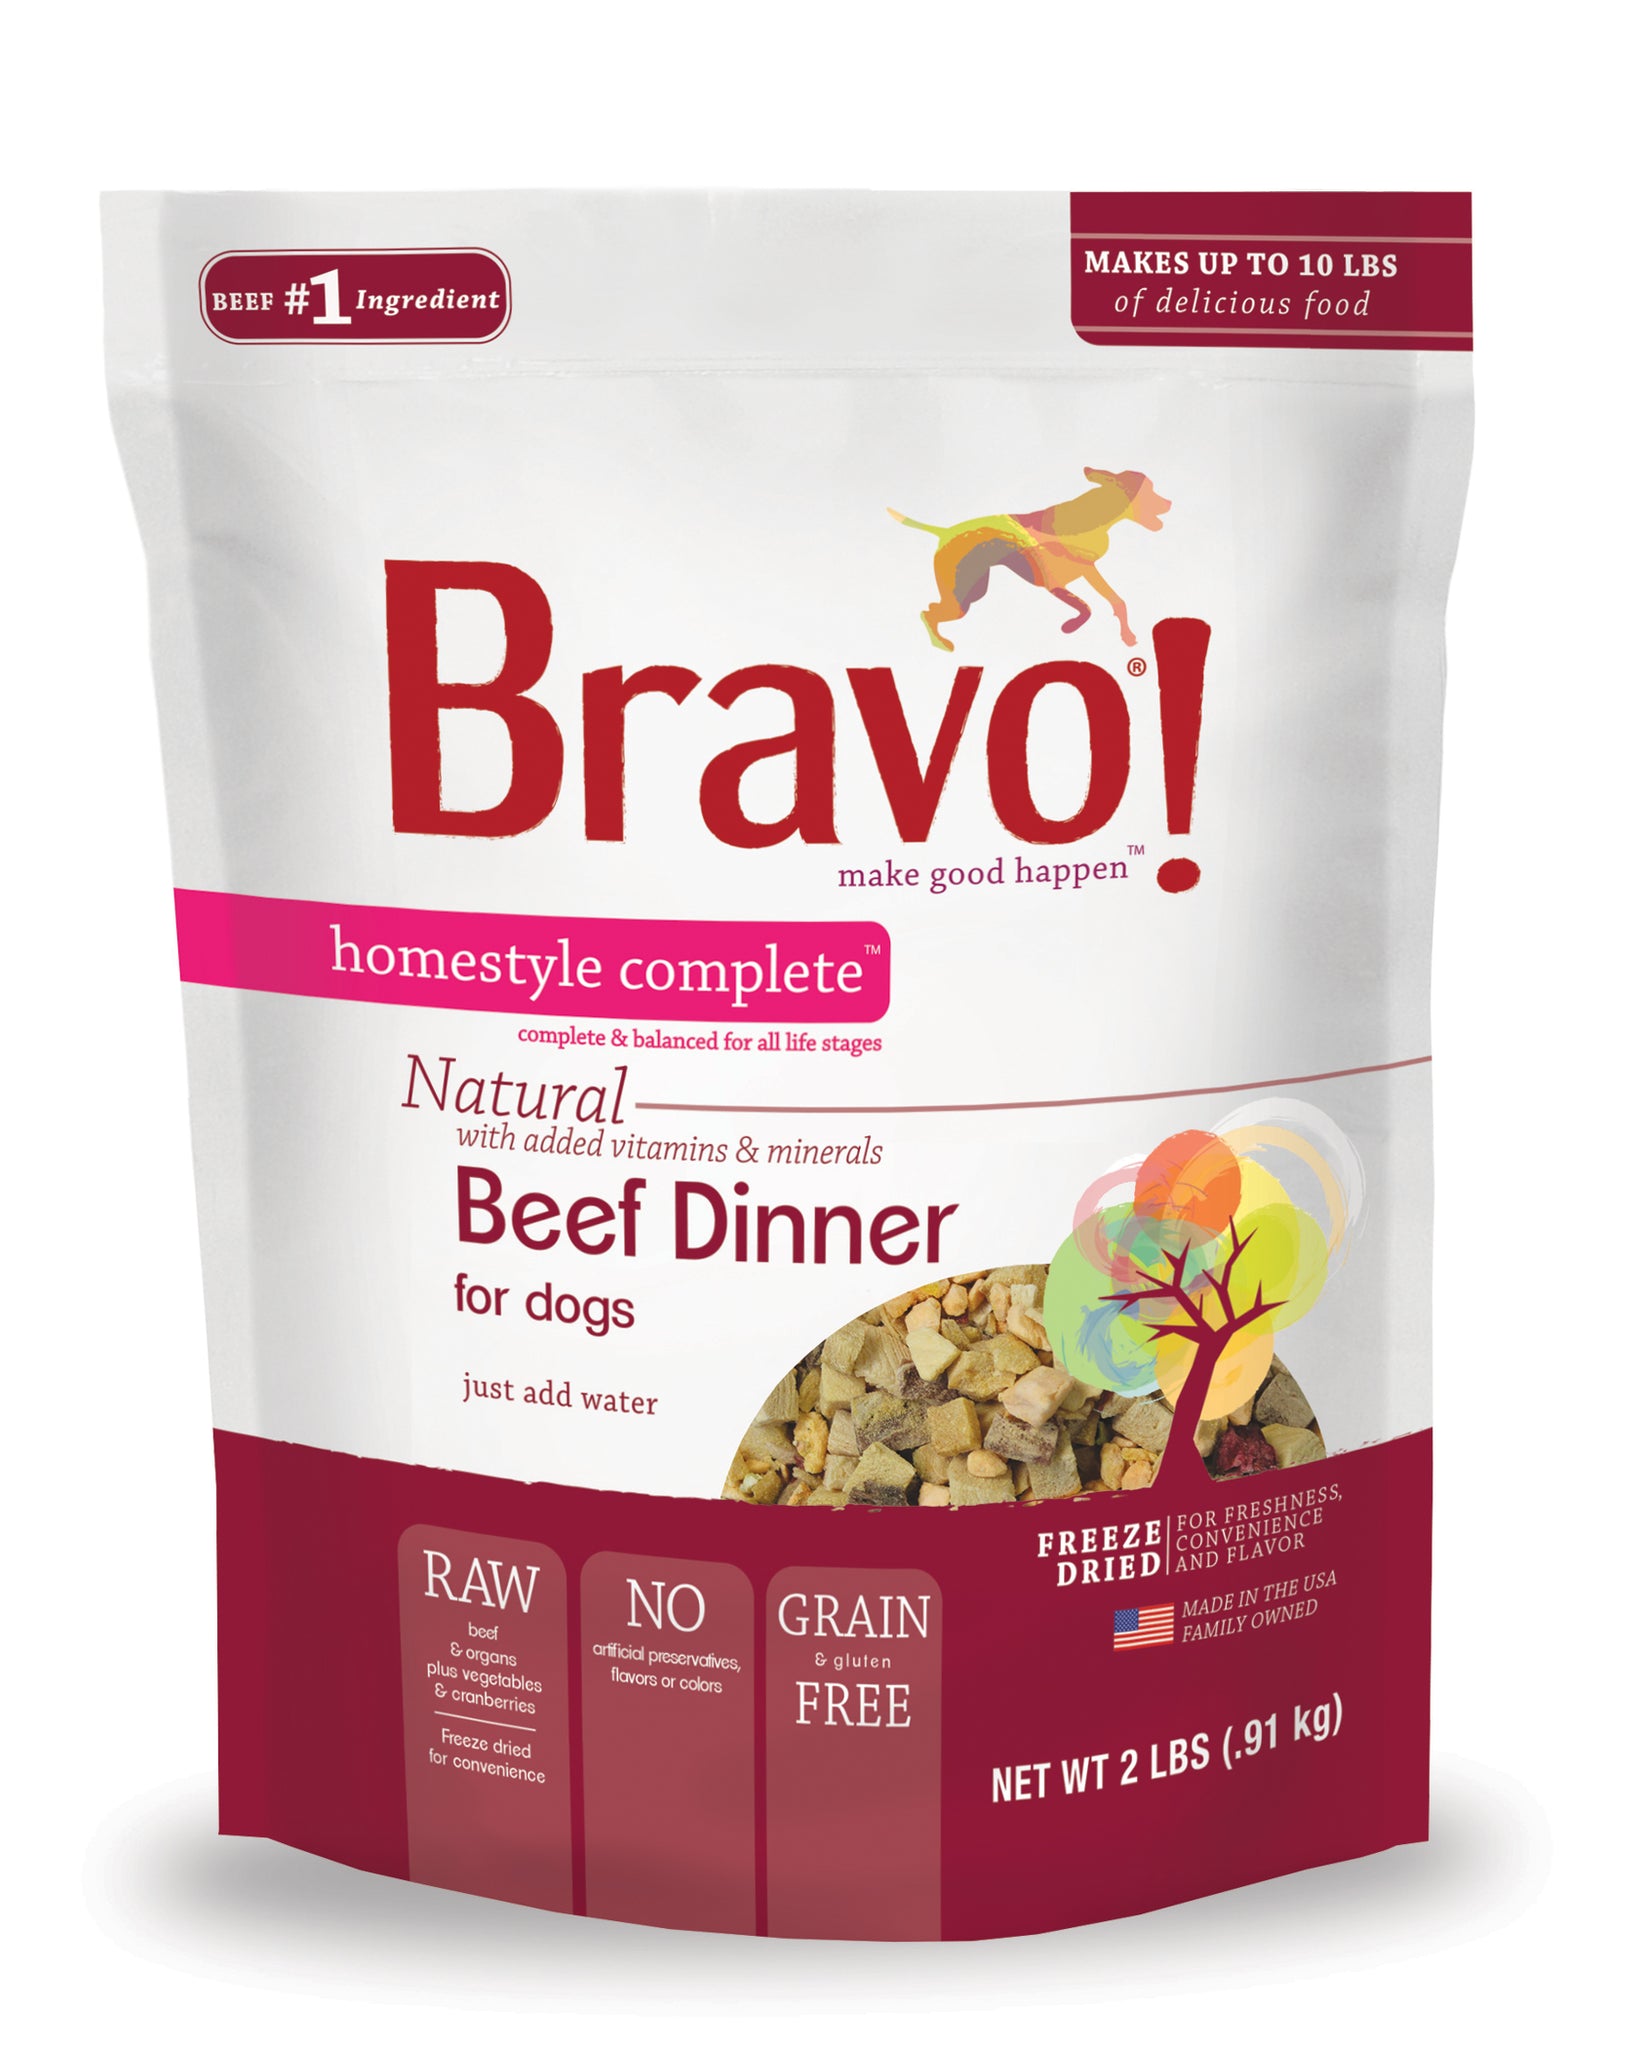 Bravo Freeze Dried Homestyle Beef Dinner